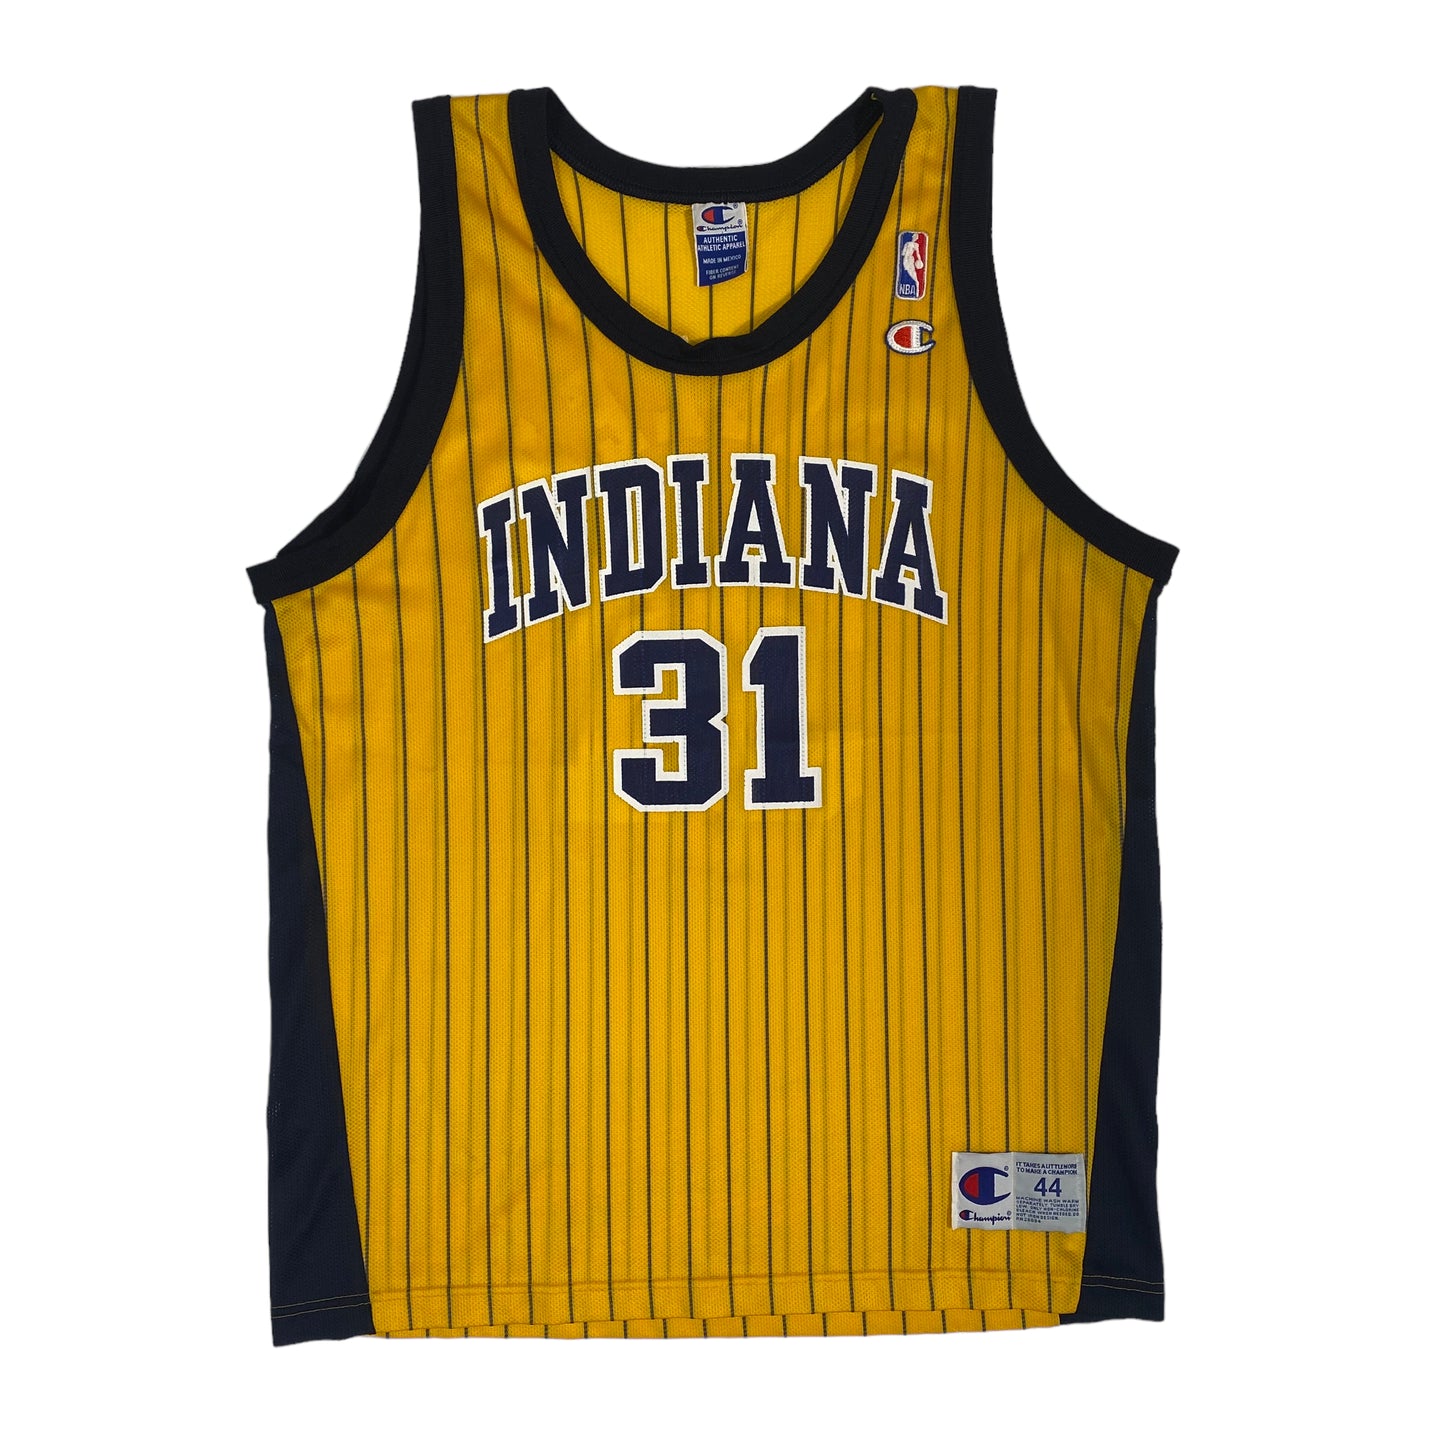 90’s Reggie Miller Indiana Pacers Champion Jersey Sz 44 (A1764)